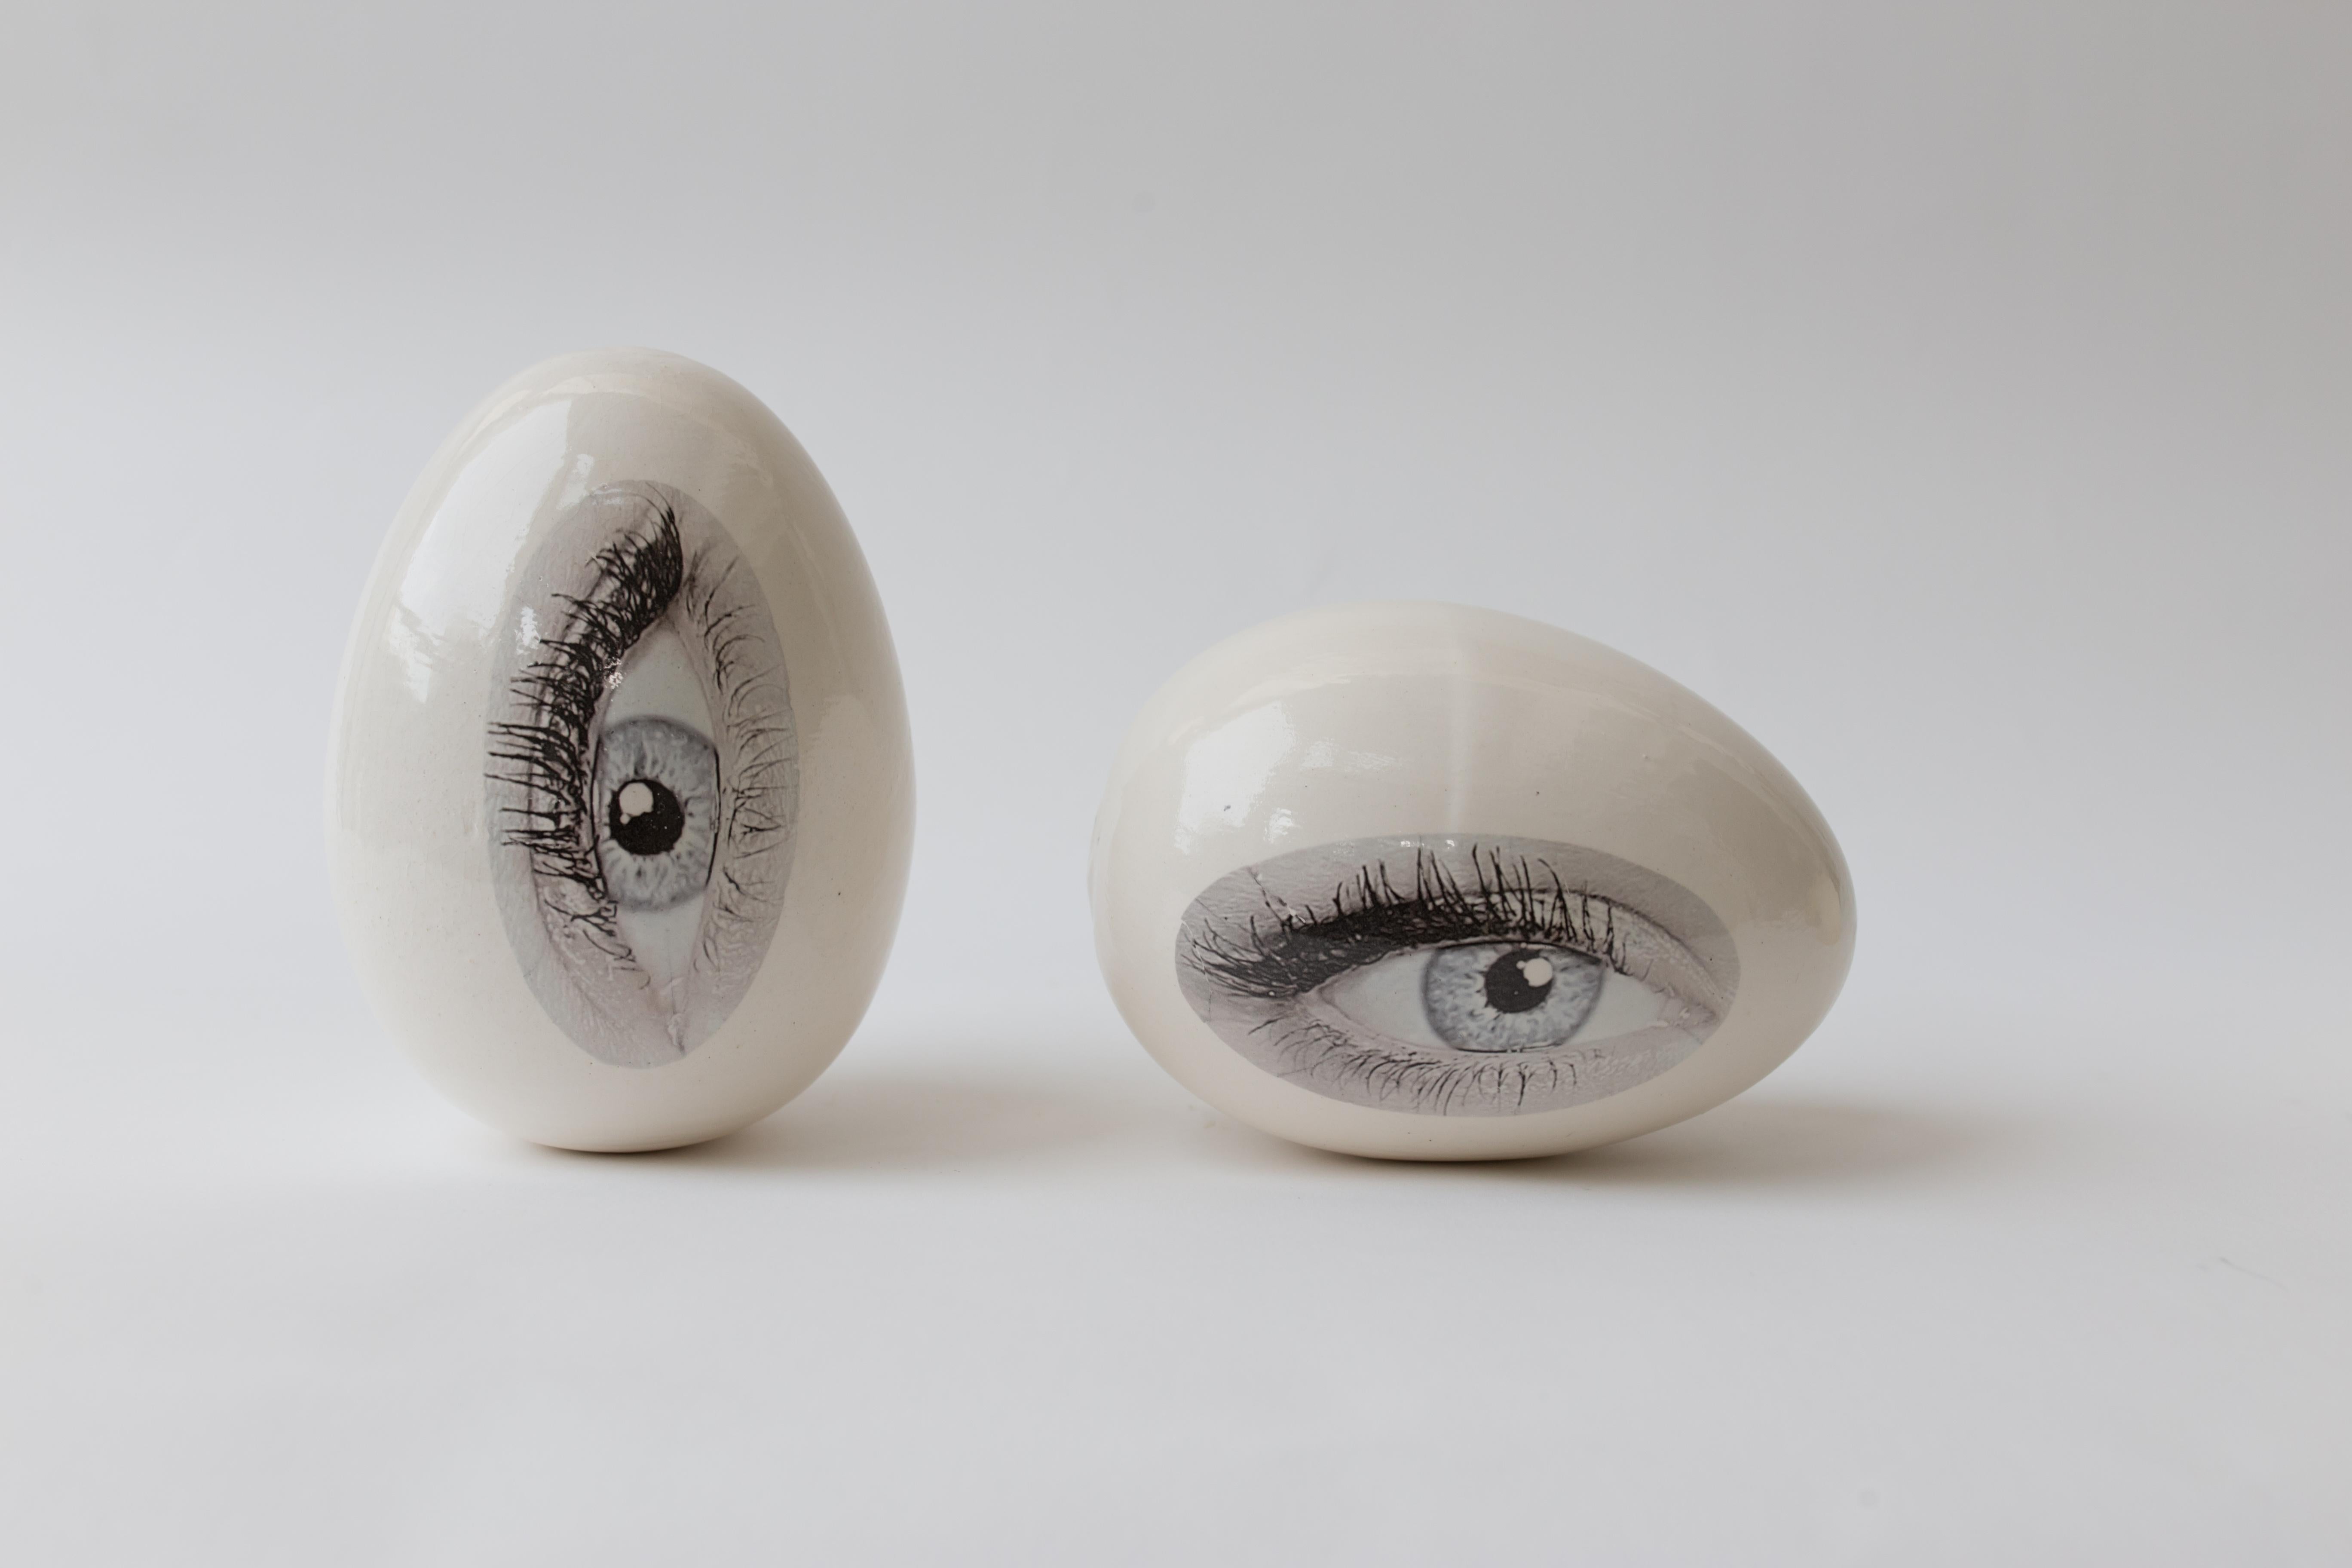 Good eye ceramic egg sculpture for home, office decor, collector piece - Mixed Media Art by Reli Smith and Osnat Yaffe Zimmerman